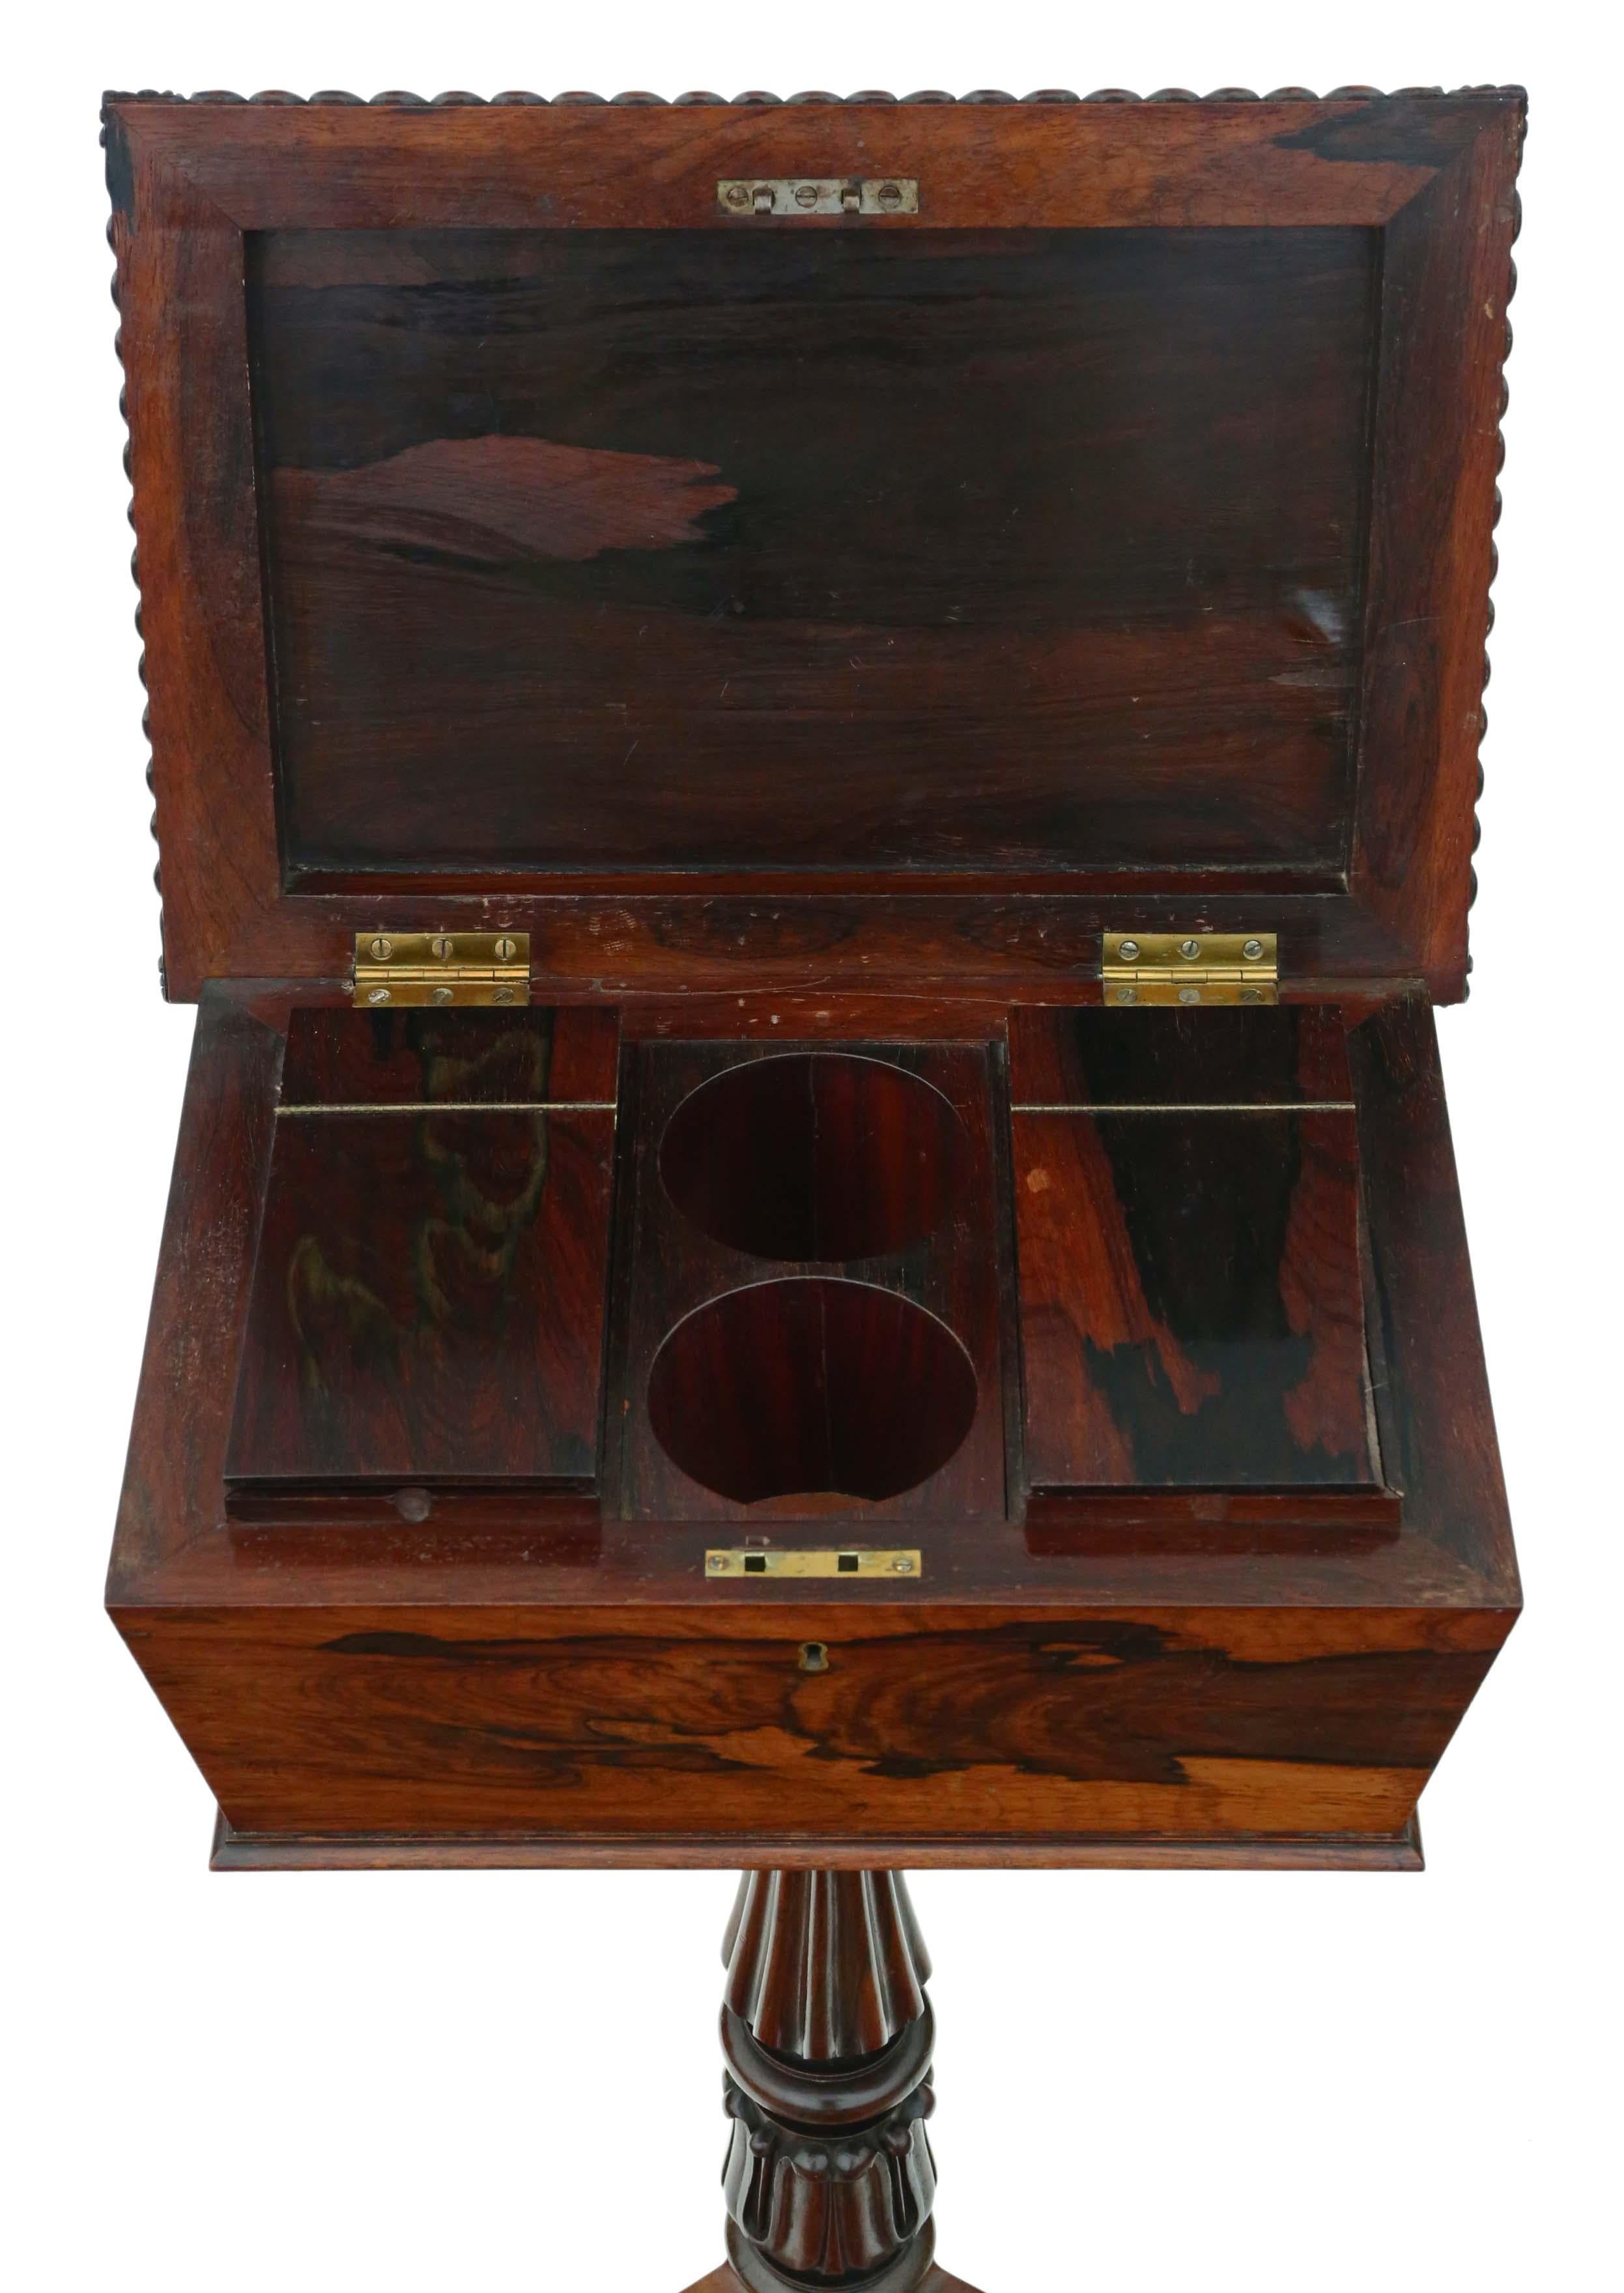 Regency Carved Rosewood Tea Ploy In Good Condition For Sale In Wisbech, Cambridgeshire